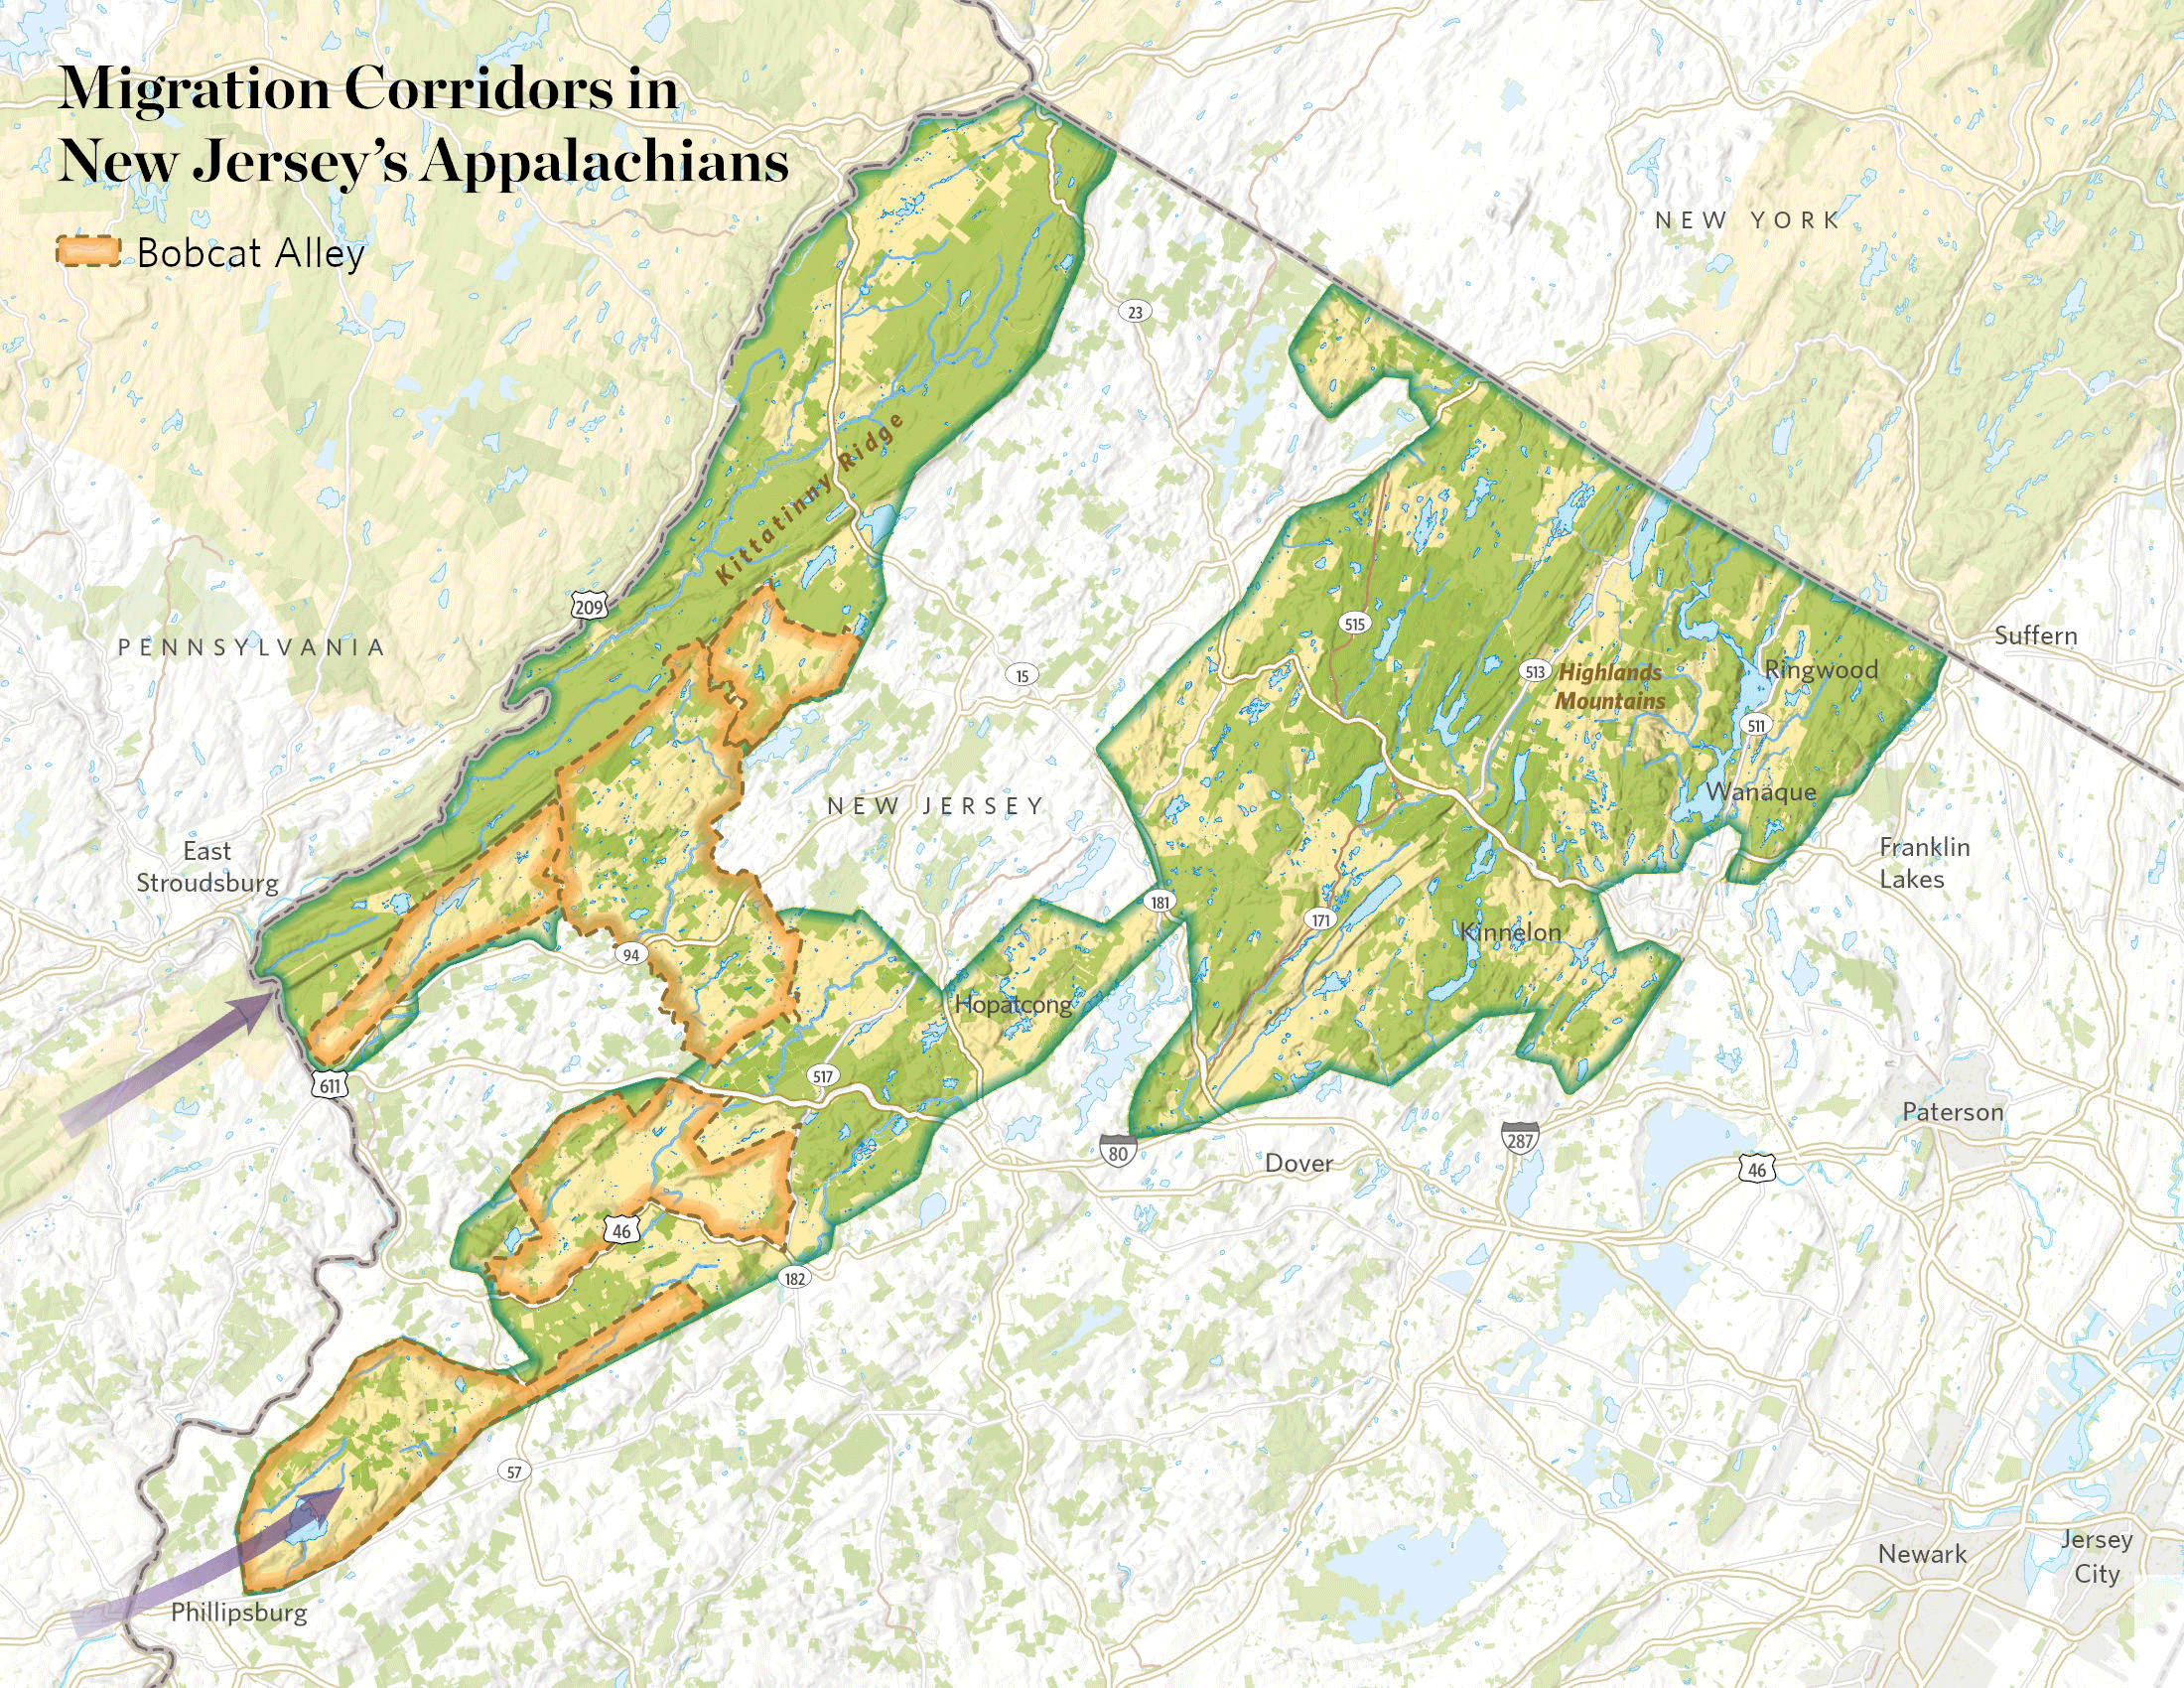 Animated gif showing migration routes in New Jersey Appalachians.